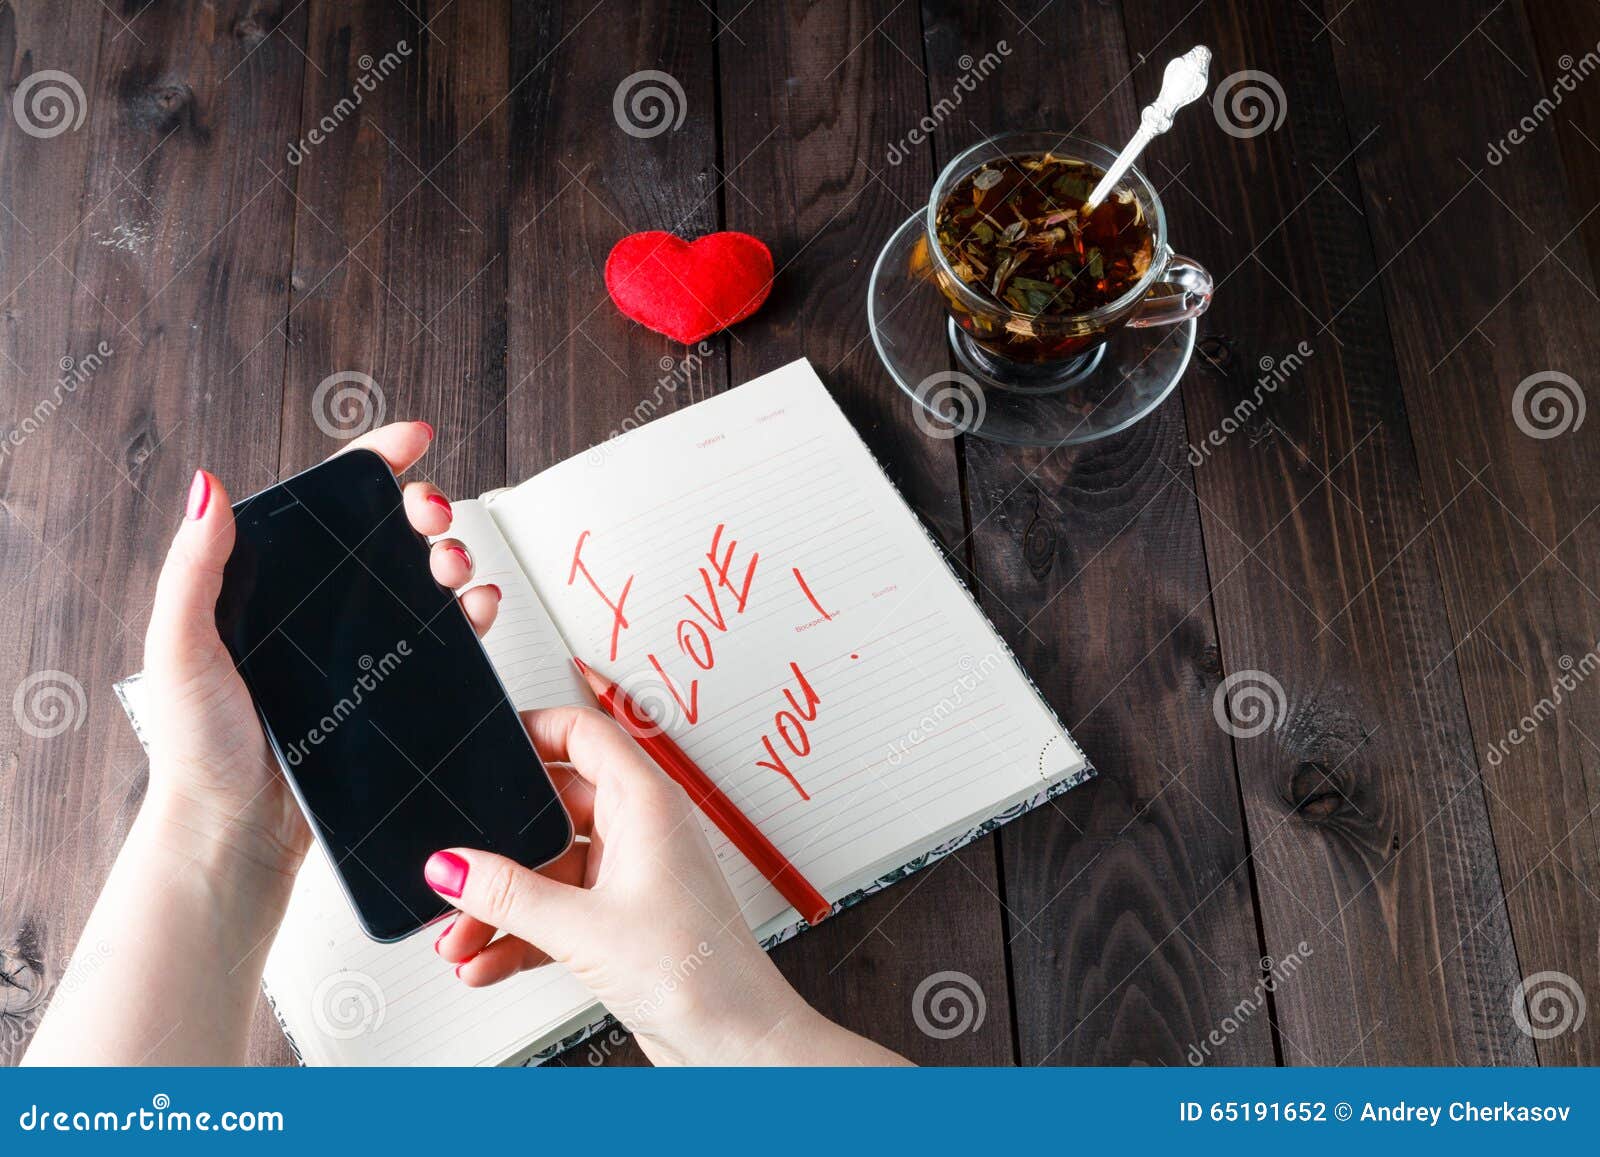 Famale write love sms stock photo. Image of letter, caucasian